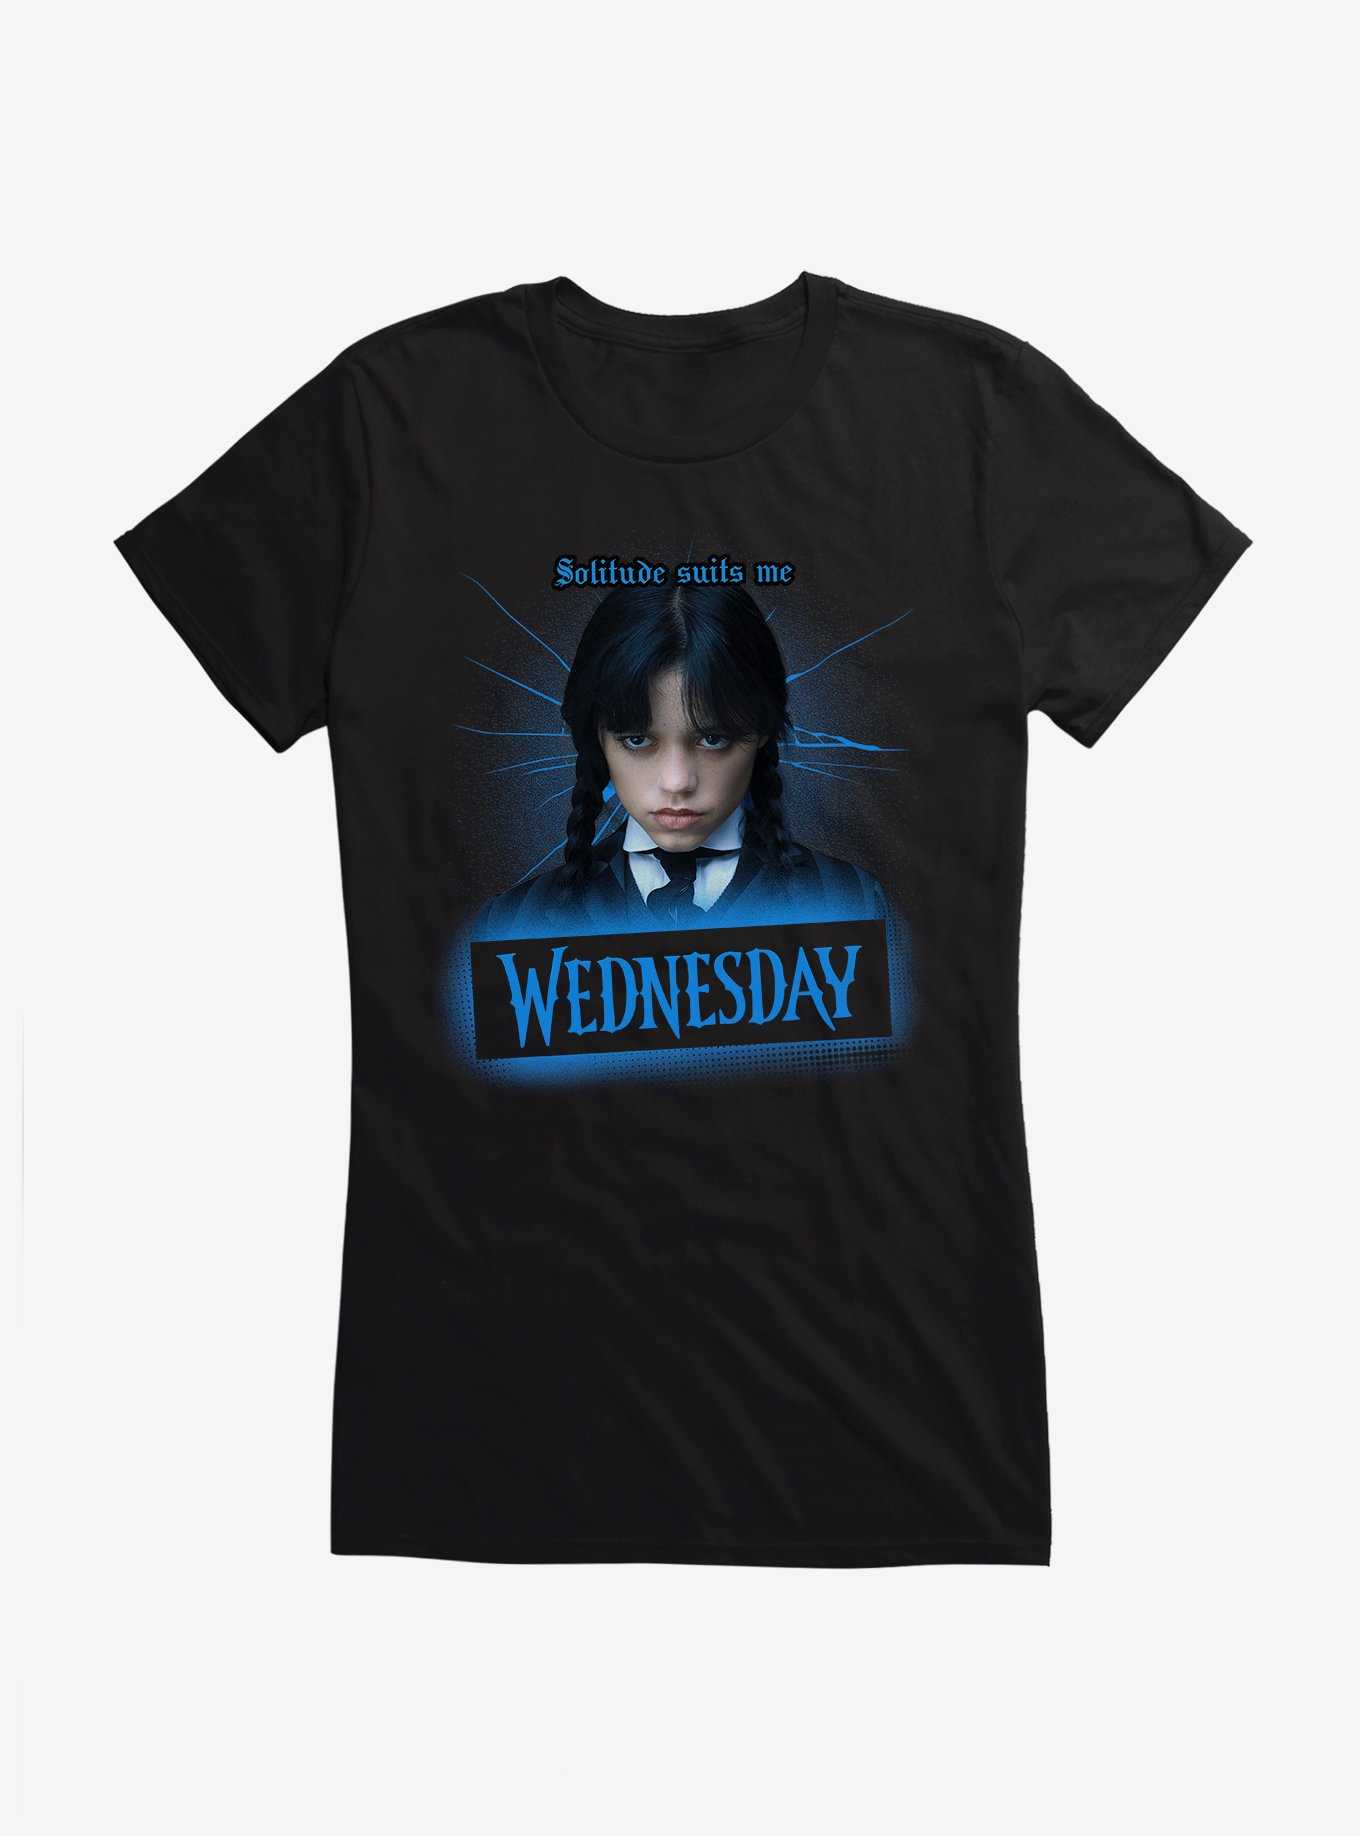 Wednesday Solitude Suits Me Girls T-Shirt, , hi-res